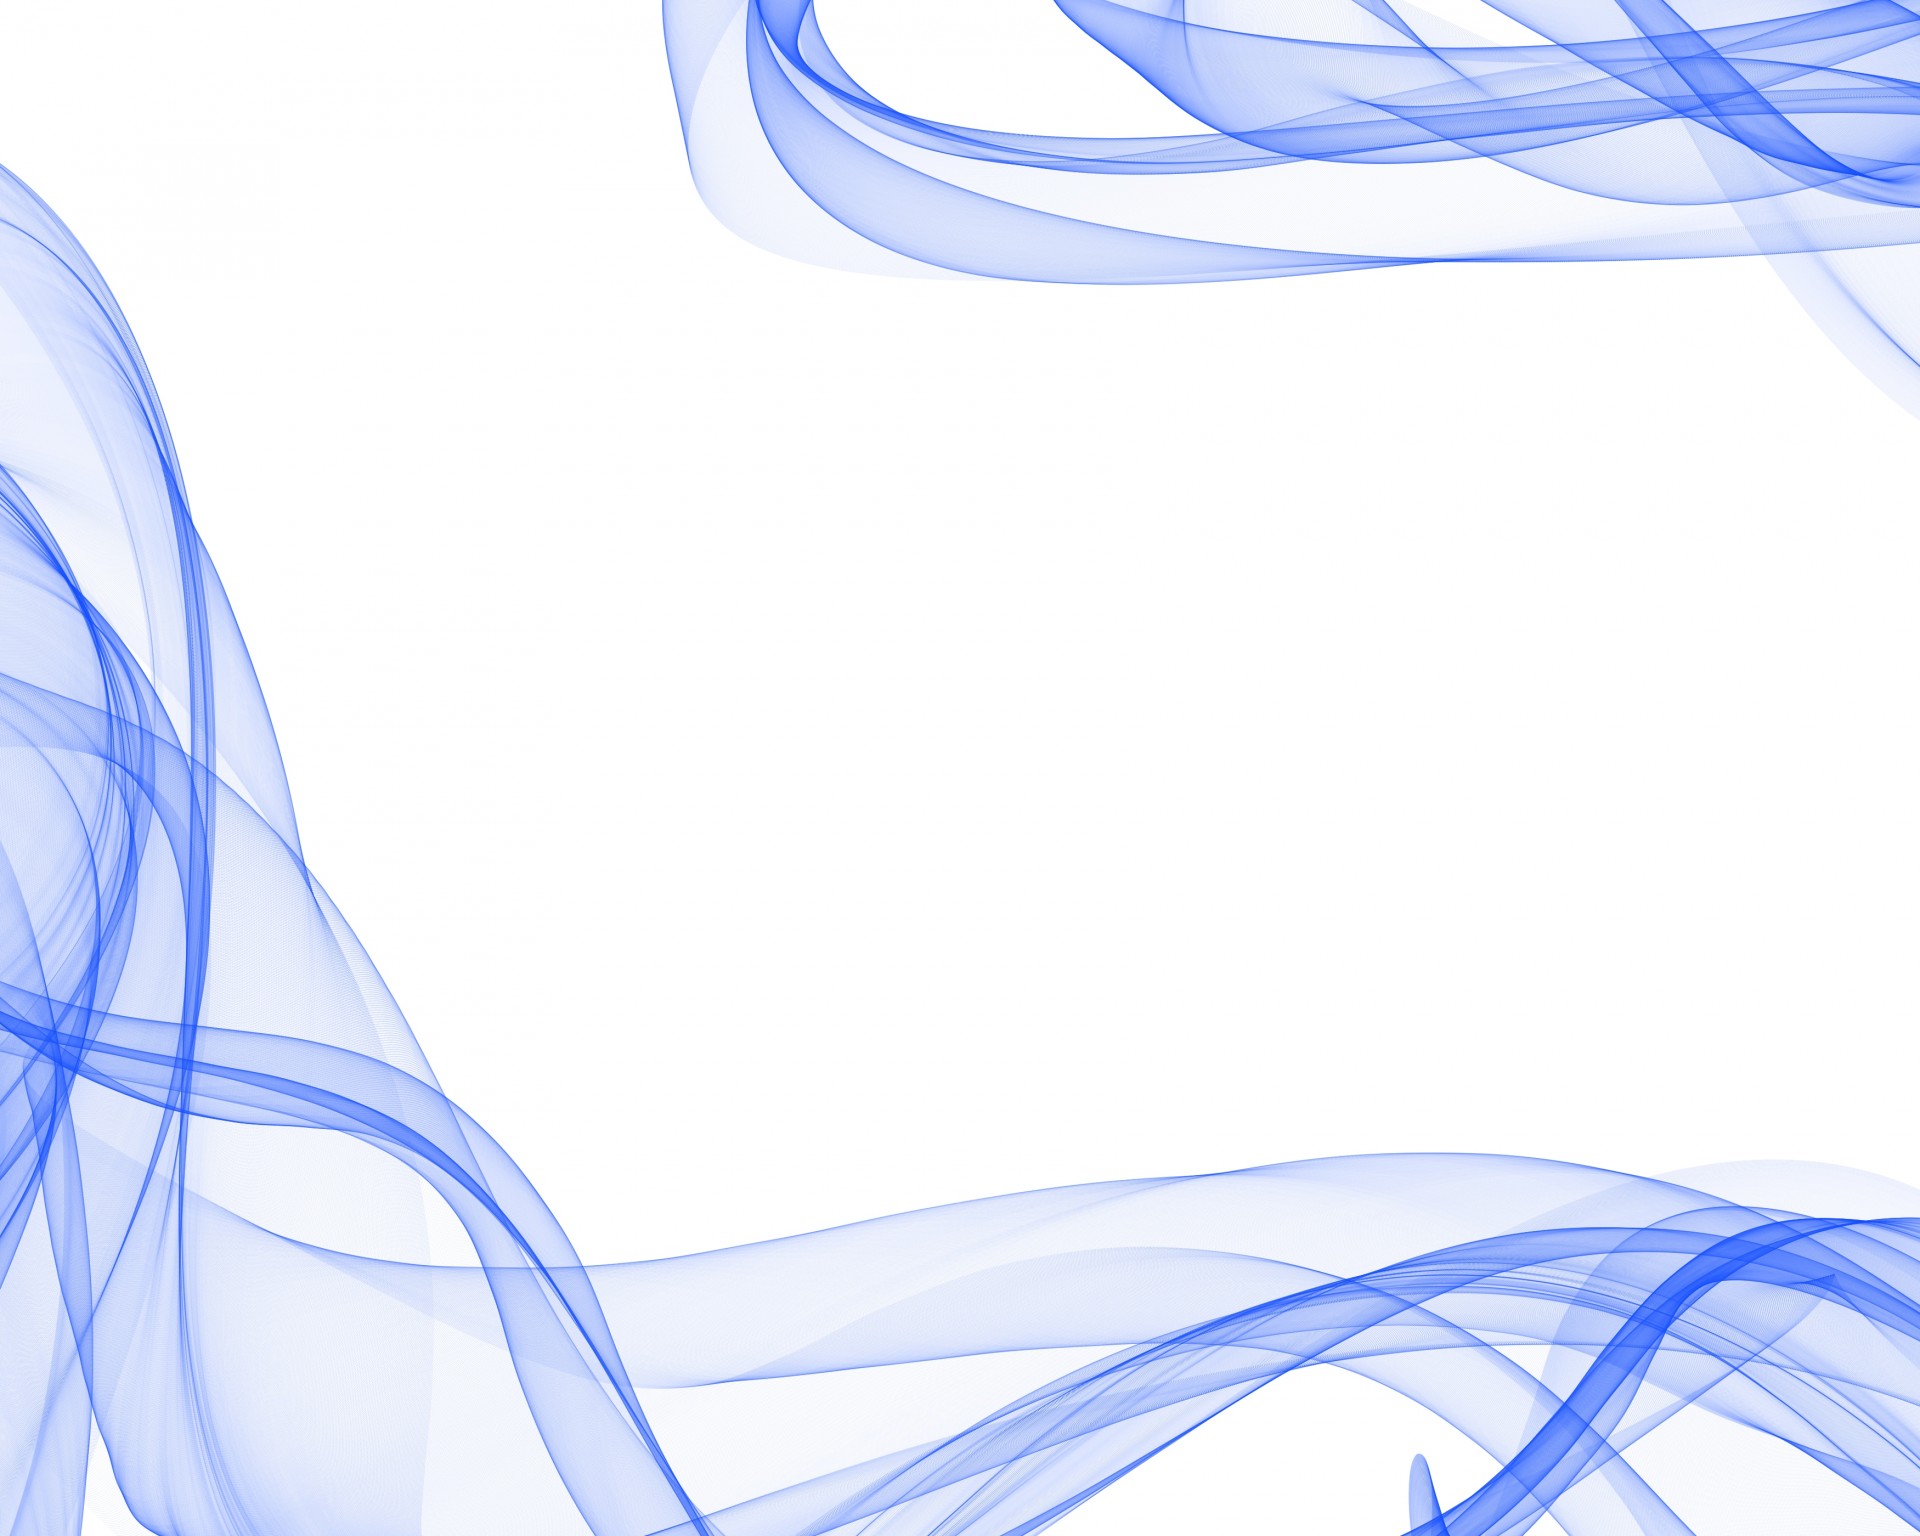 Illustration of a smokey blue ribbon effect floating against a white background.